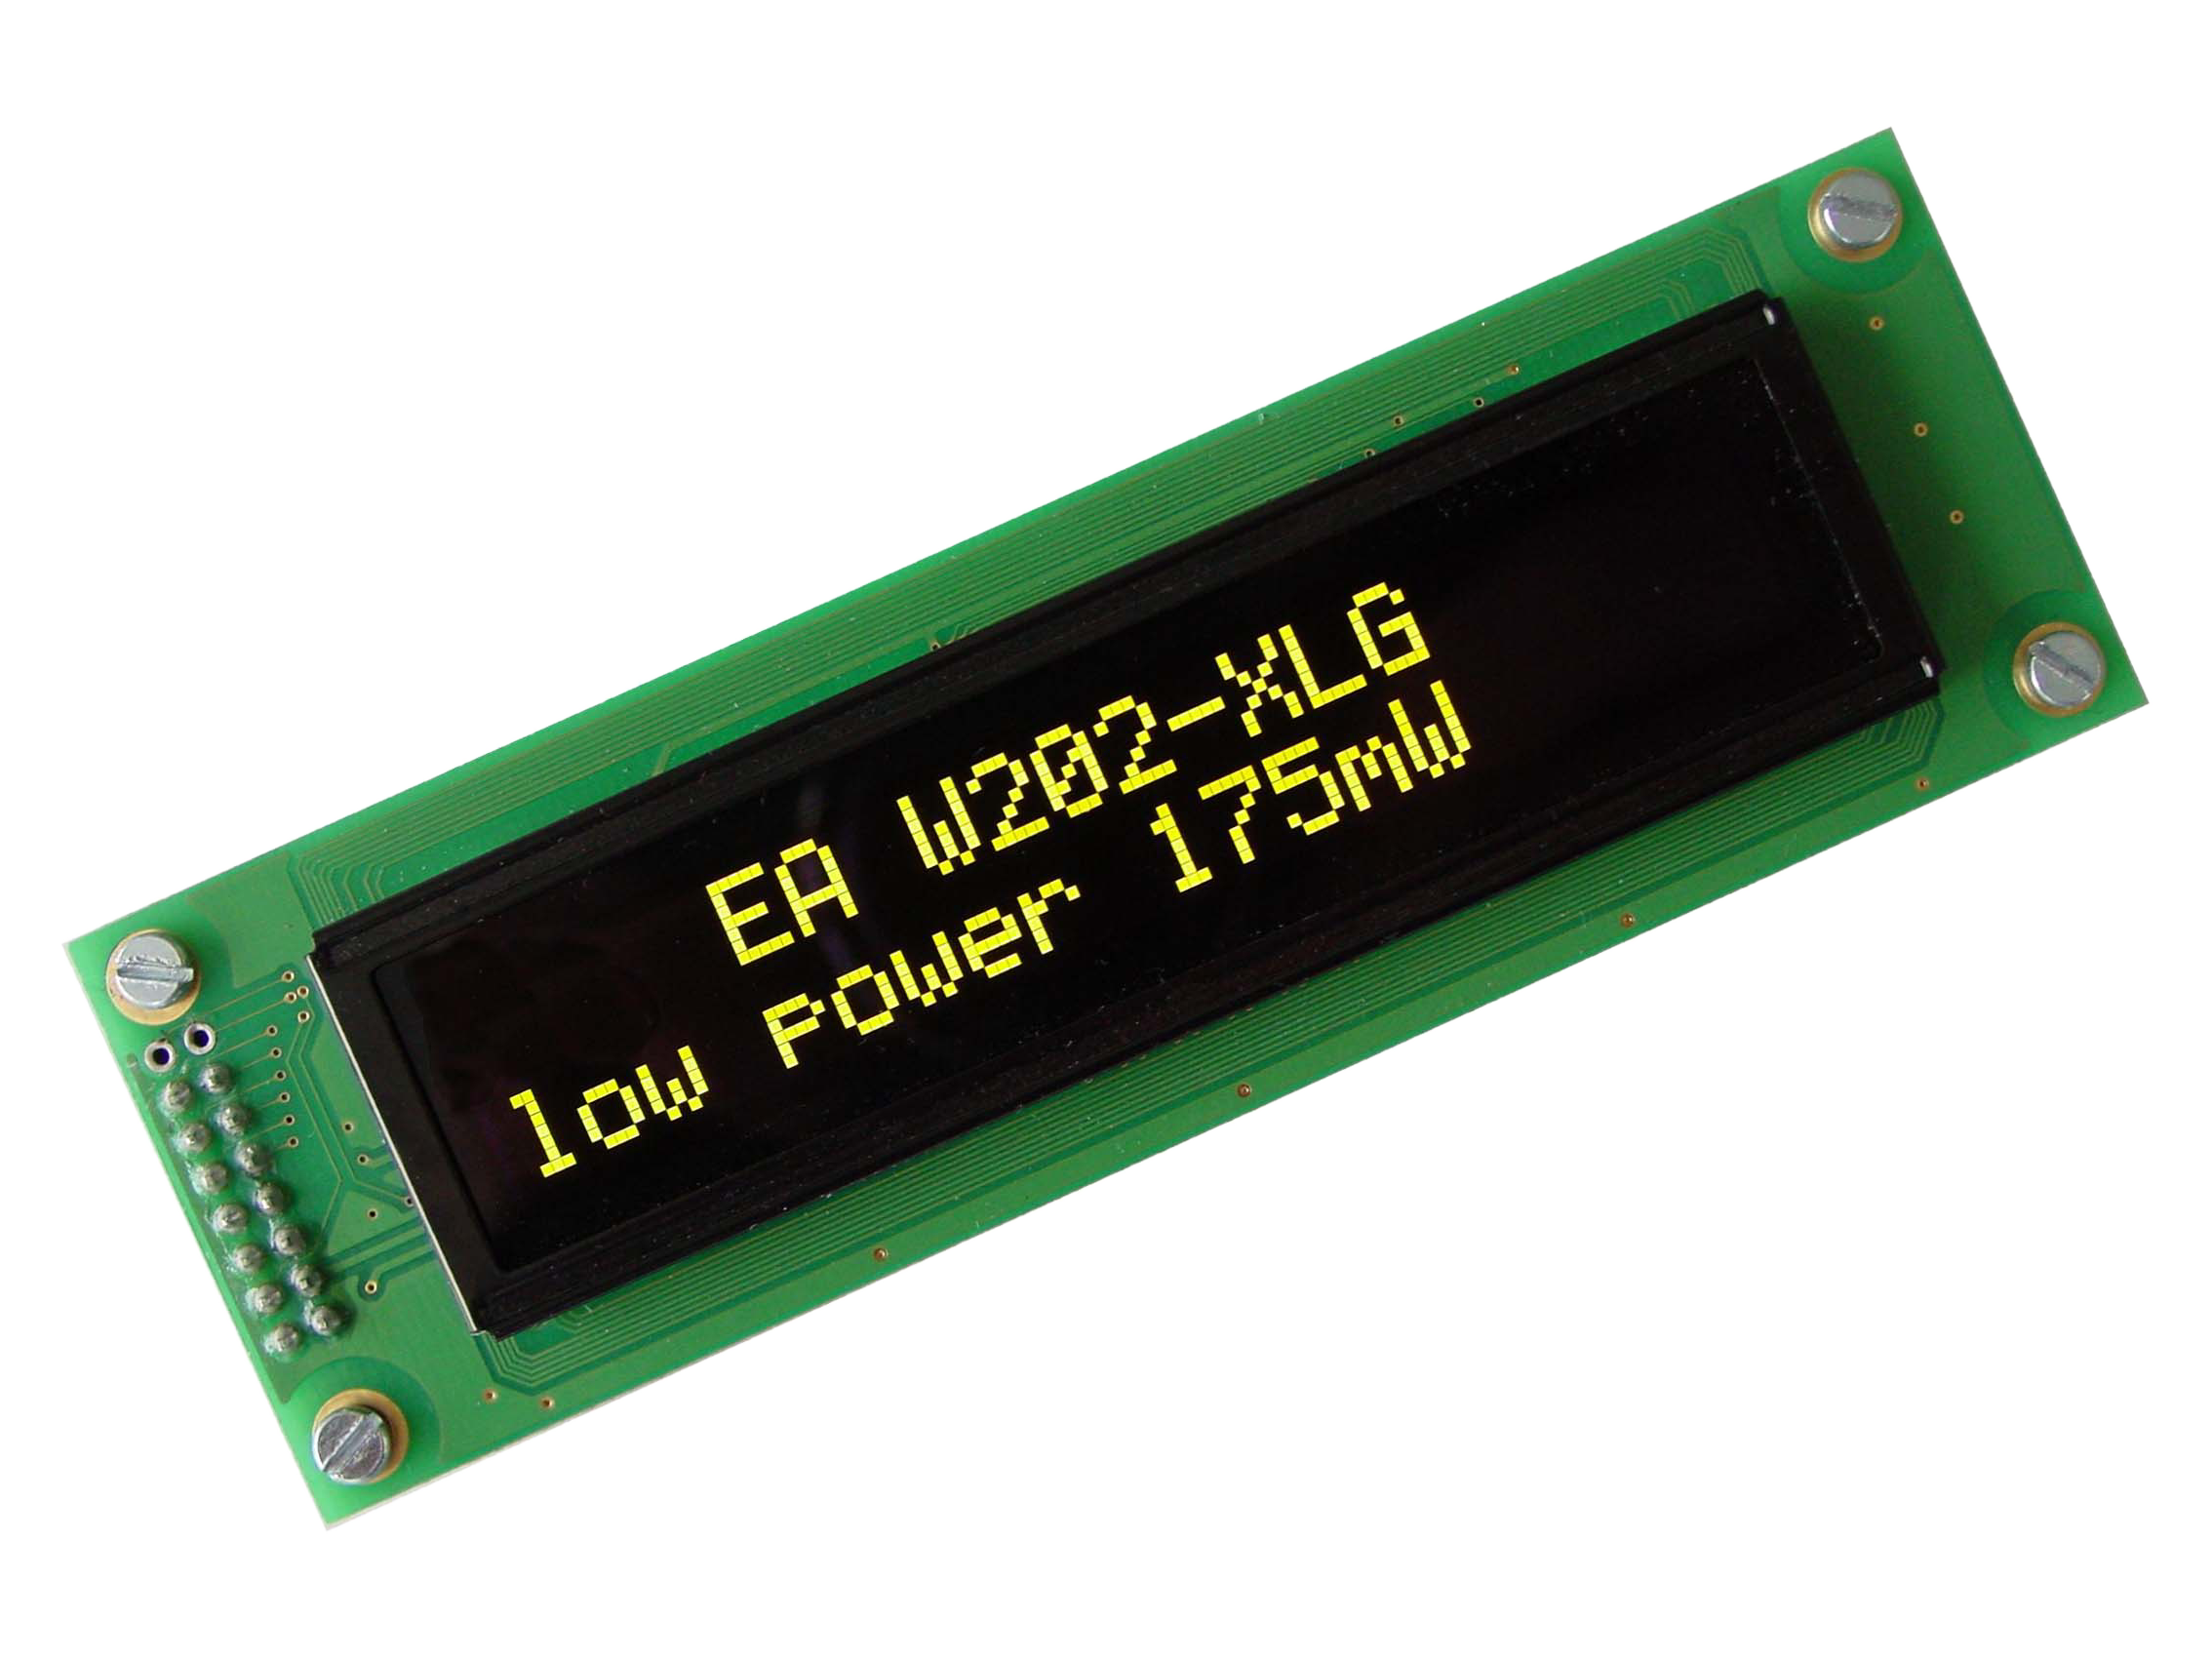 2x20 OLED Character Display with 4/8bit and SPI W202-XLG